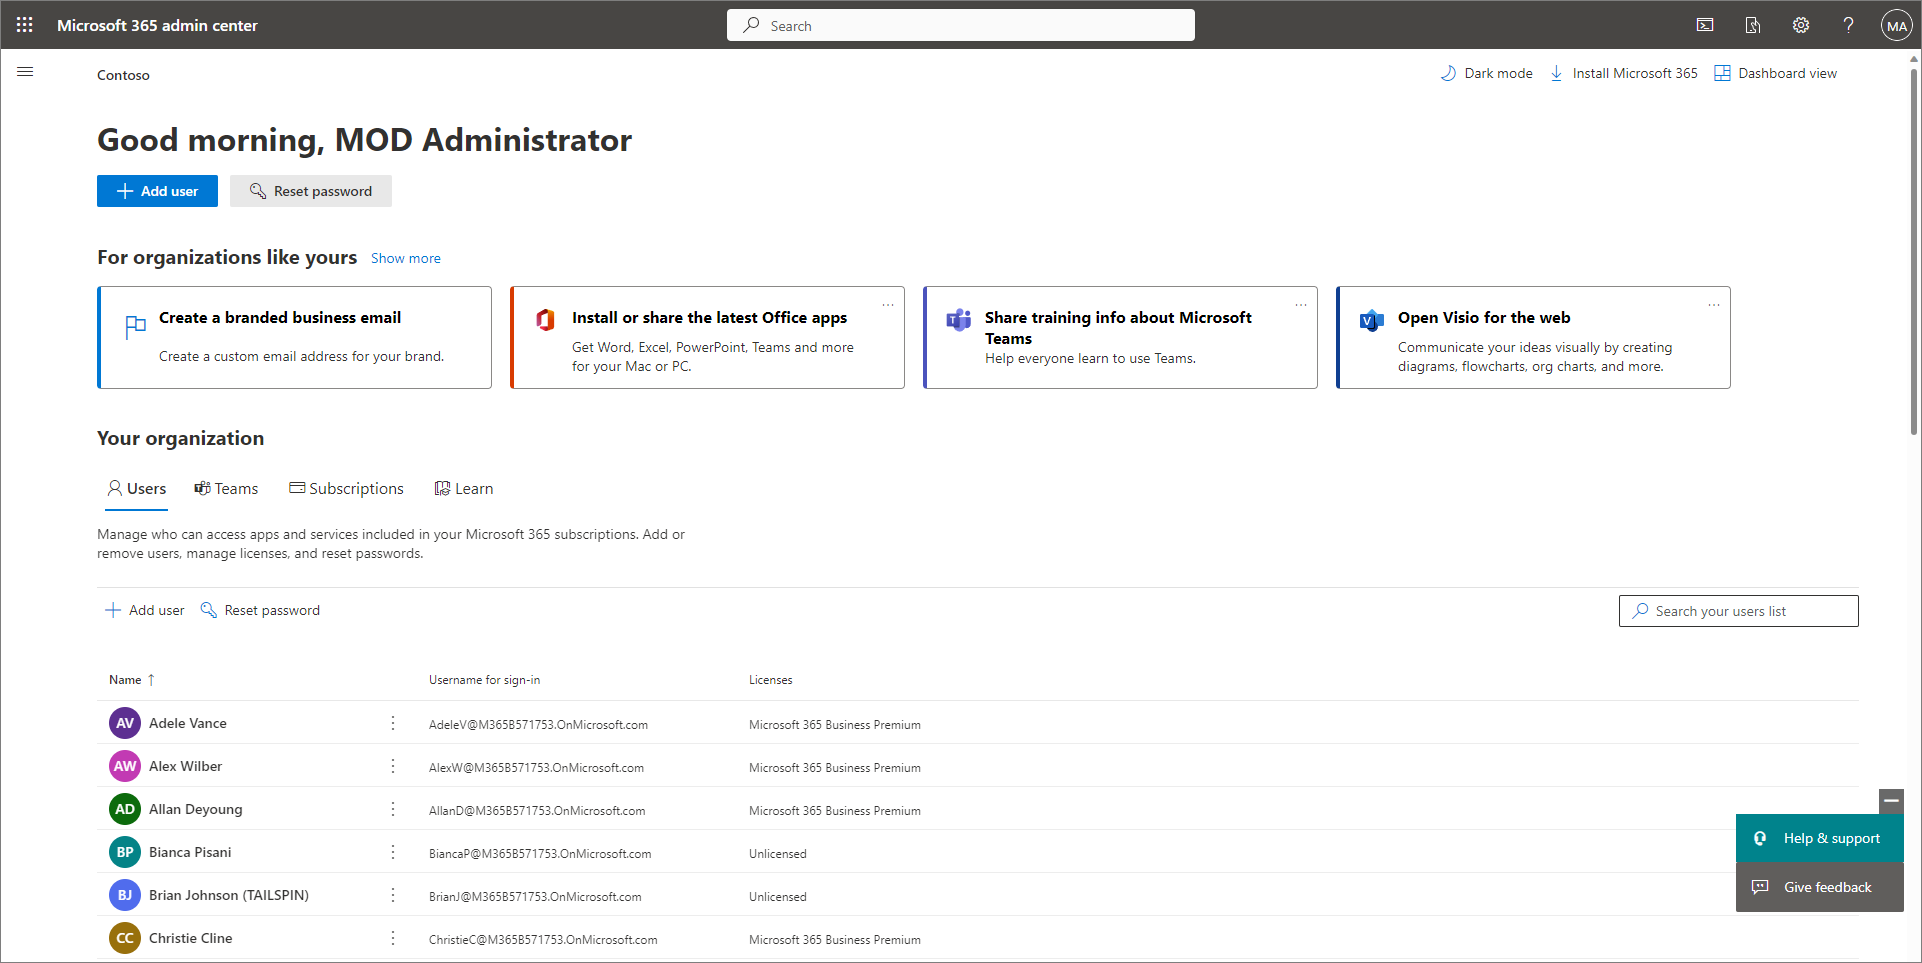 Screenshot showing the simplified view of the Microsoft 365 admin center.